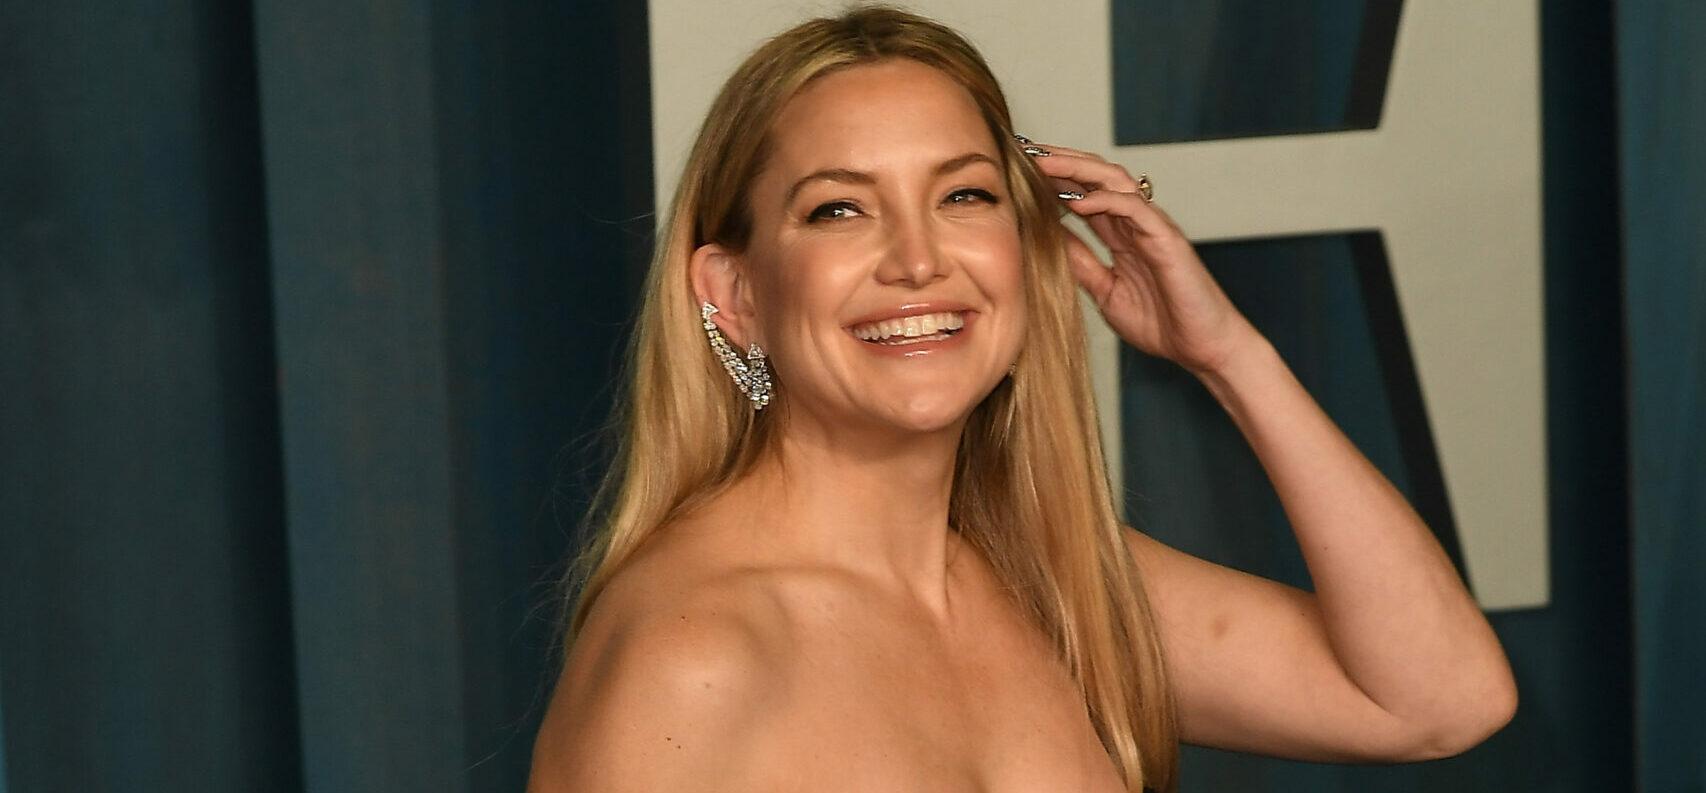 Kate Hudson Stunning In Dress That’s Everywhere This Summer!